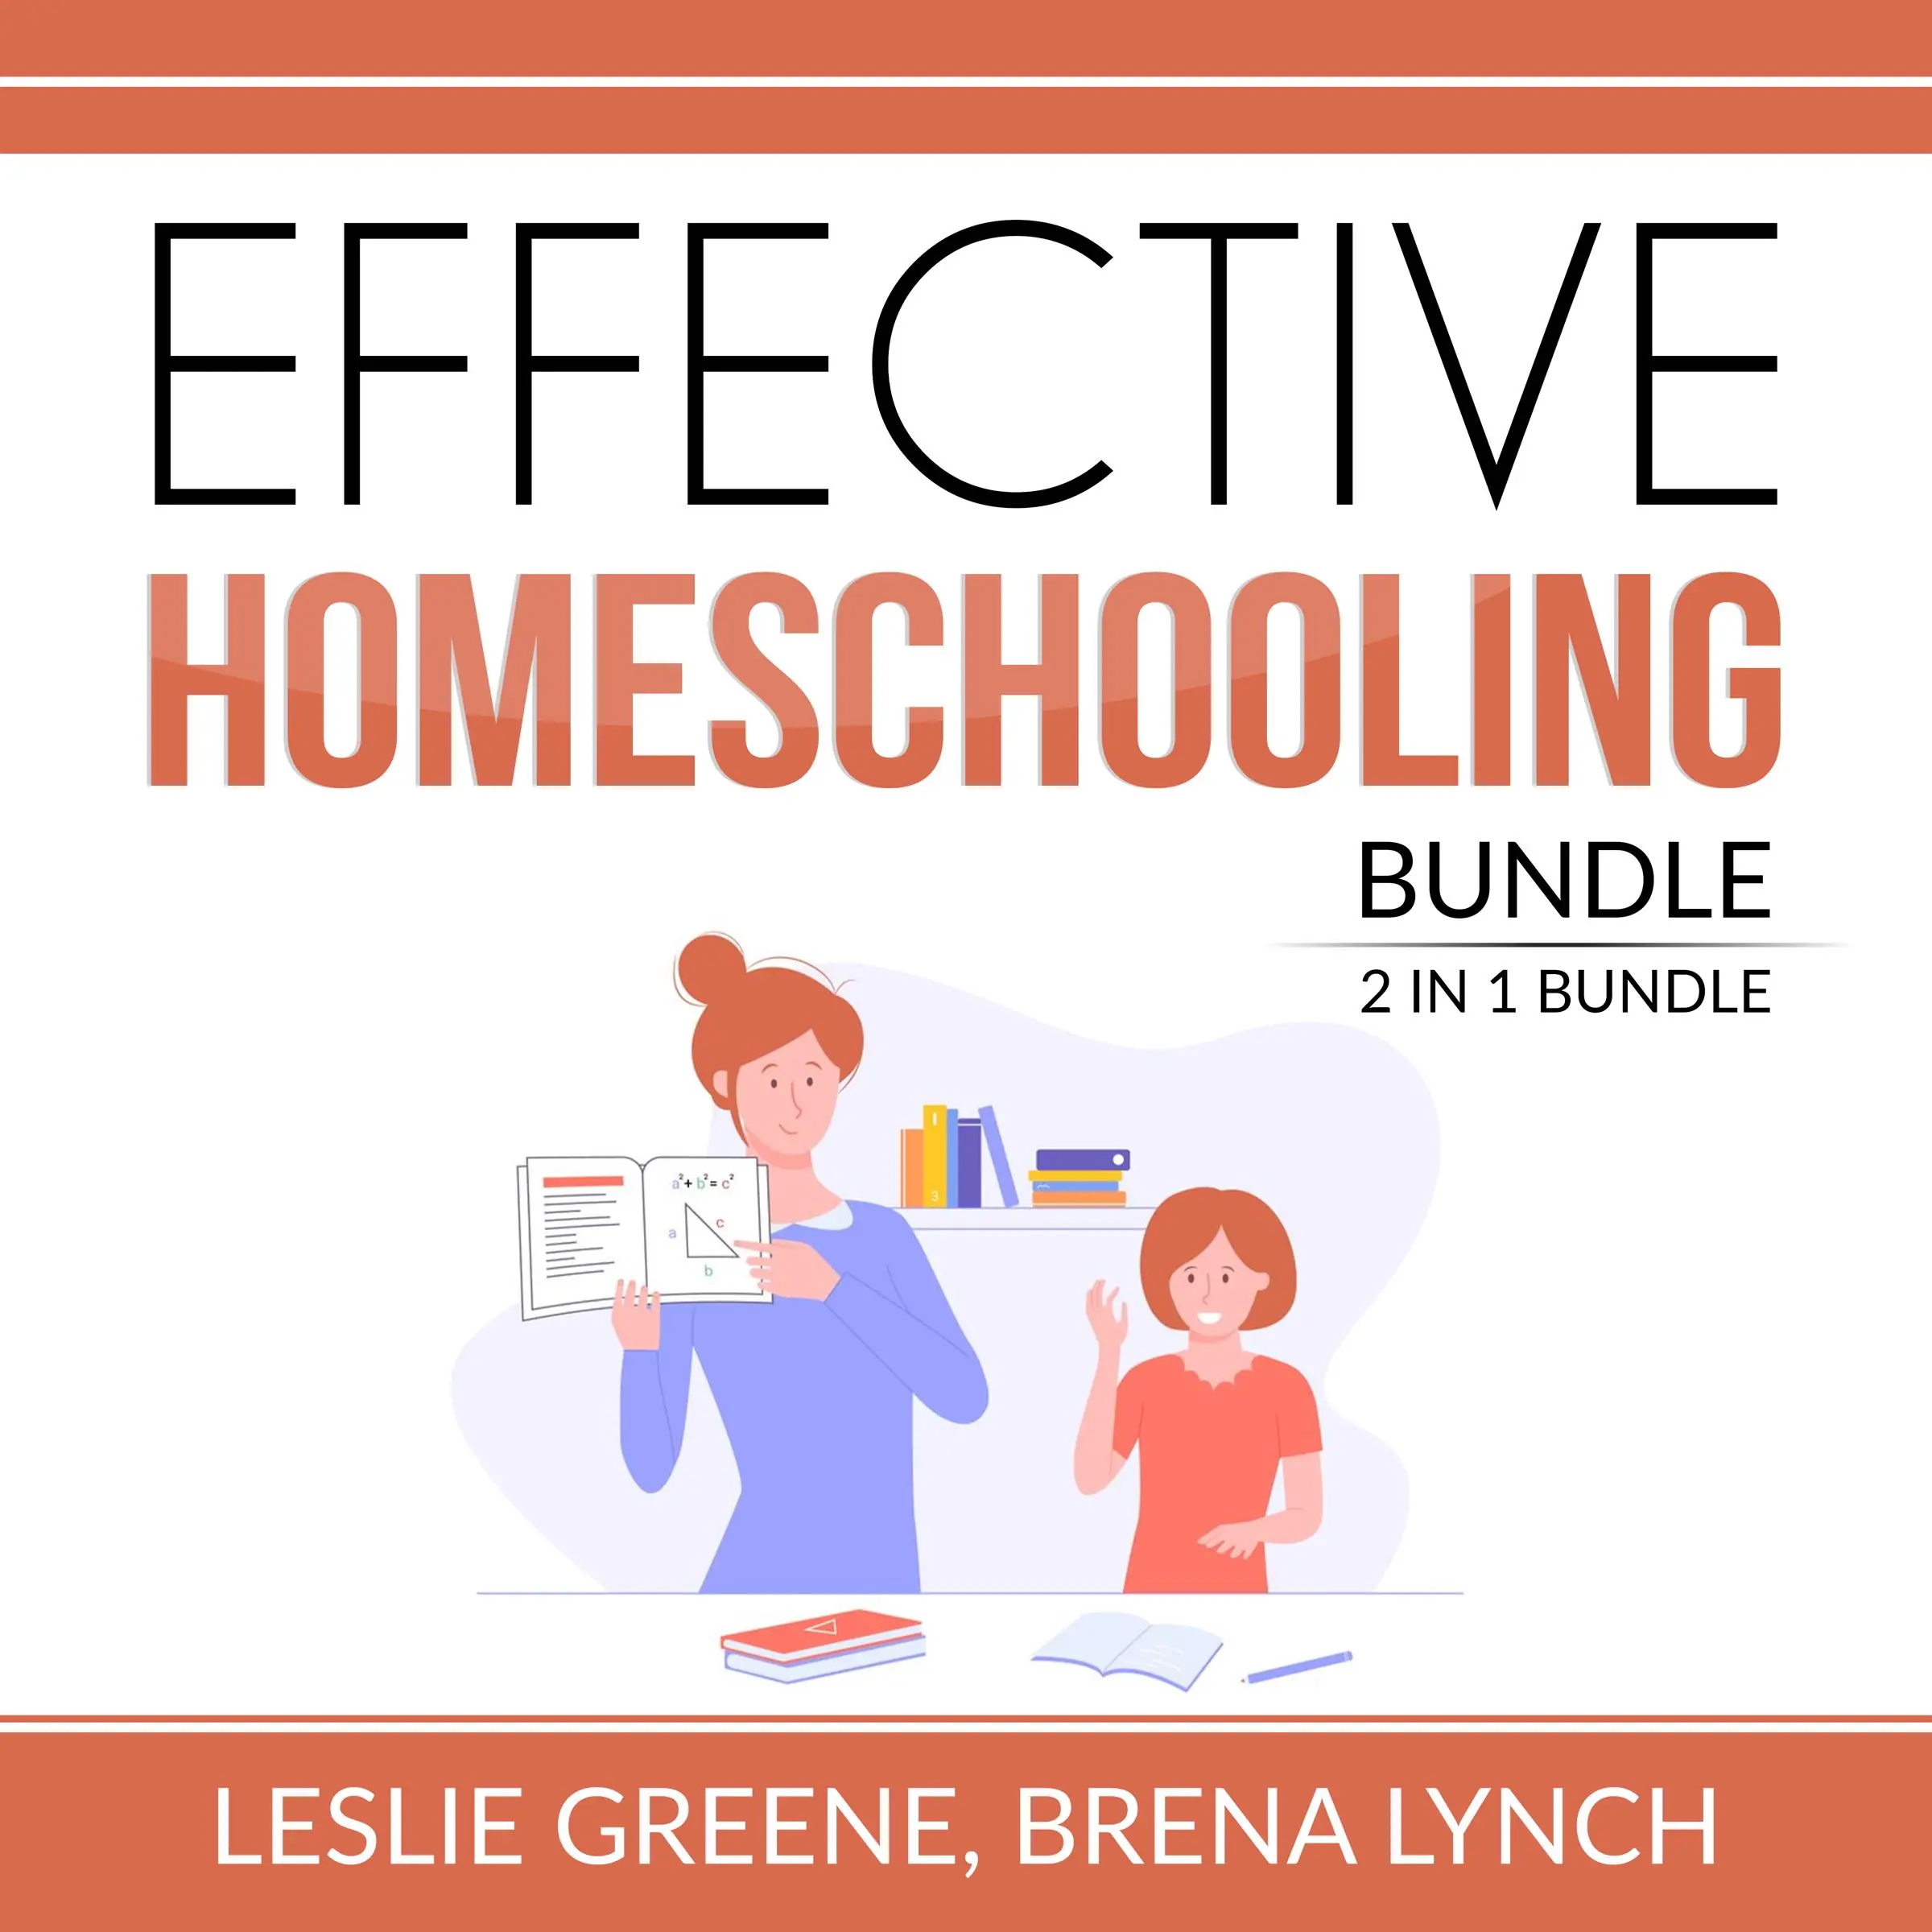 Effective Homeschooling Bundle, 2 IN 1 Bundle: Home Learning, Homeschool Like an Expert Audiobook by and Brena Lynch